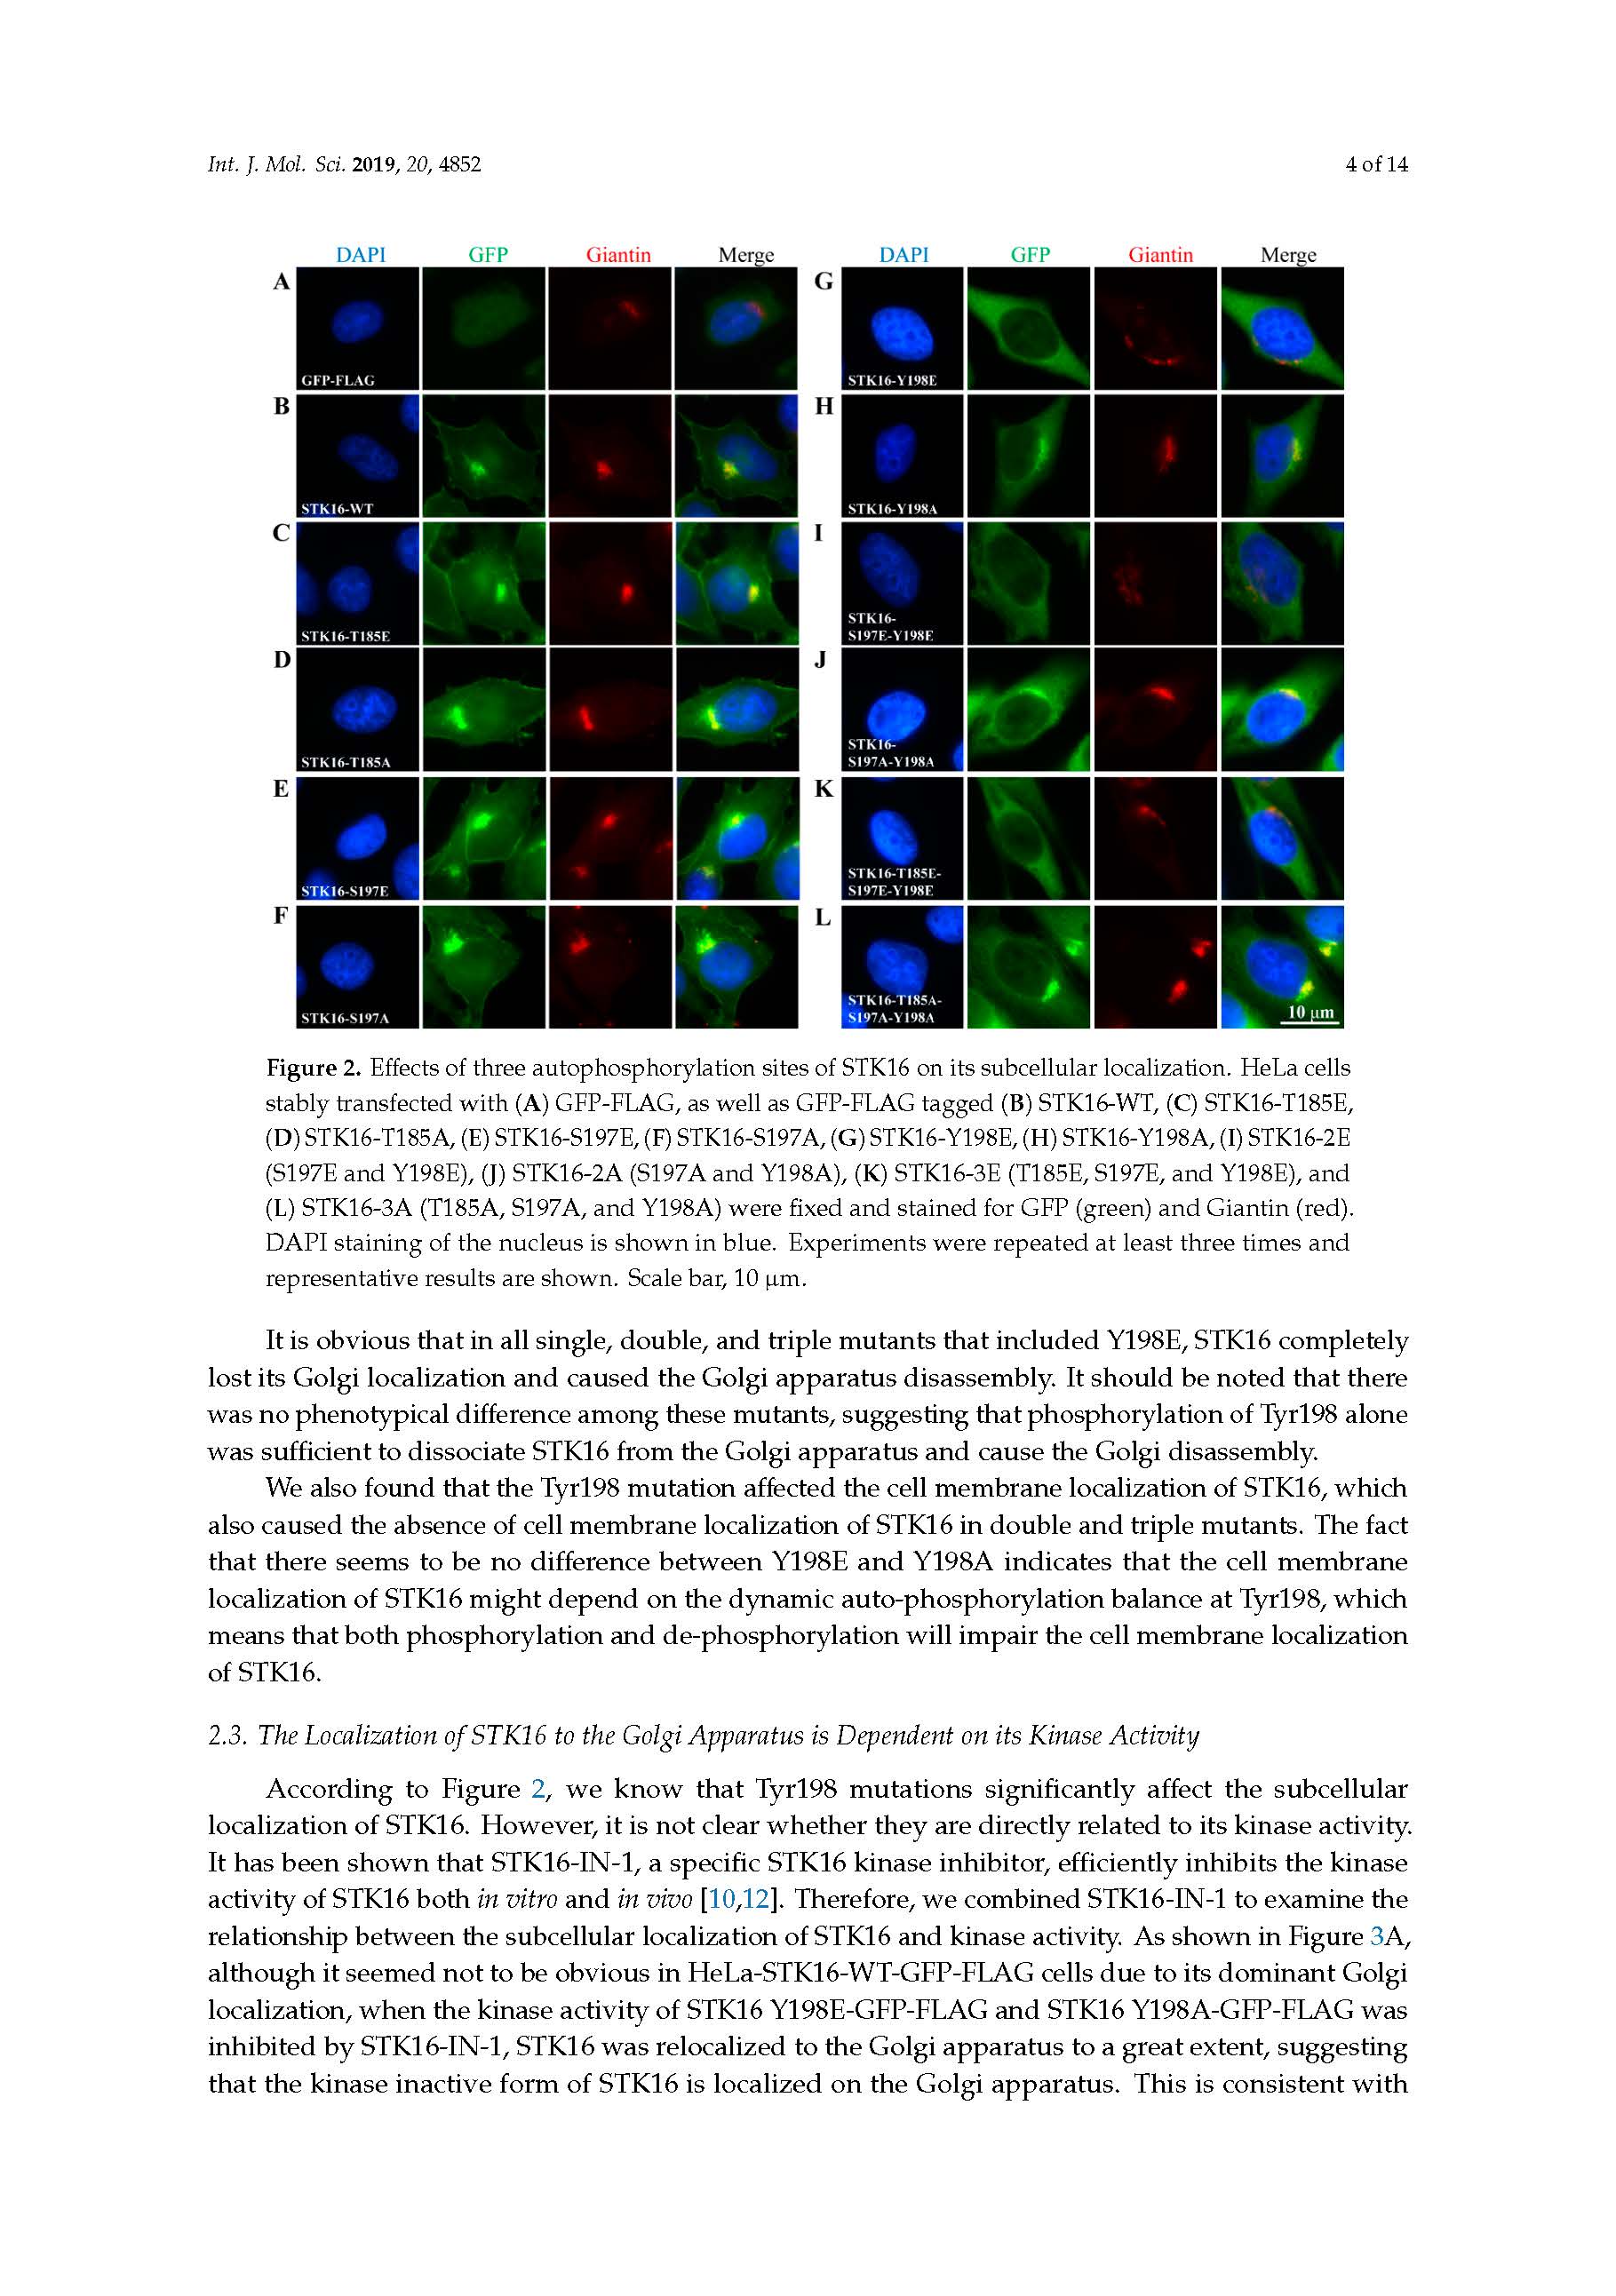 37-2019 Tyr198 is the essential autophosphorylation site for STK16 localization and kinase activity-张欣致谢文章_页面_04